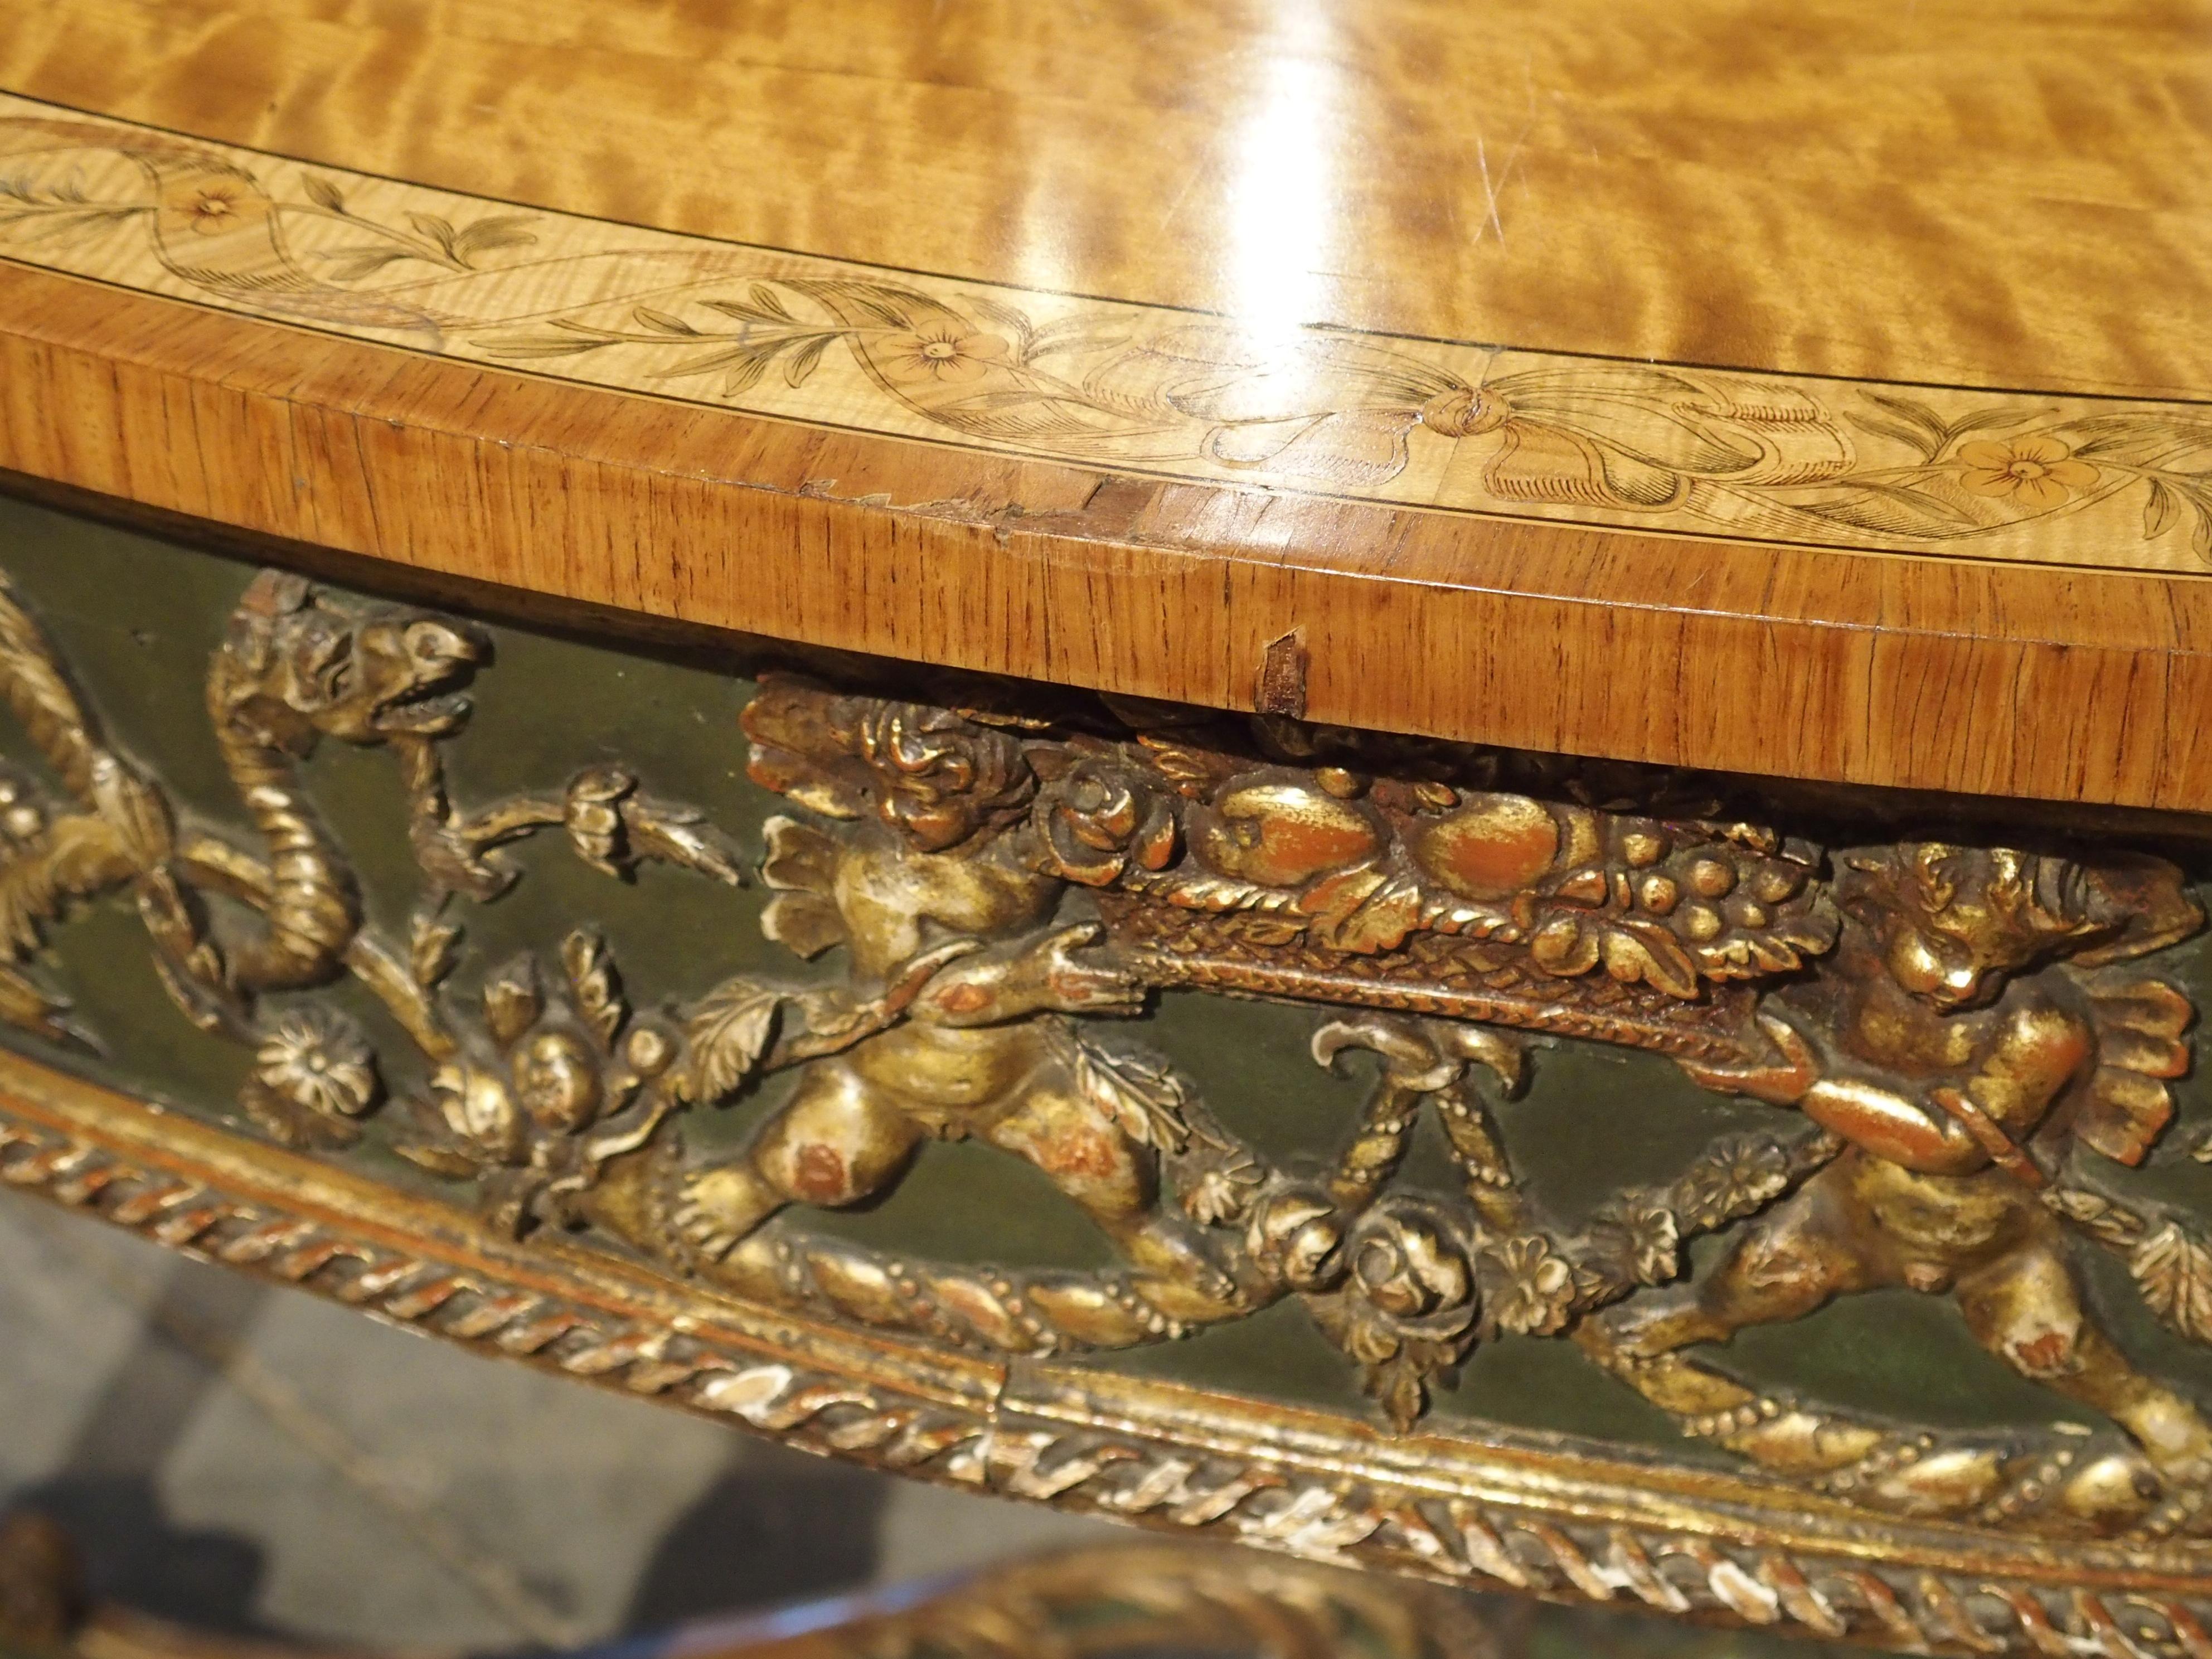 This antique Italian neoclassical console table is majestic in height, standing at over 41 inches tall. demilune in shape, this table would make a great addition to a large entryway or foyer.

Produced in the late 1700s, the console has a top made